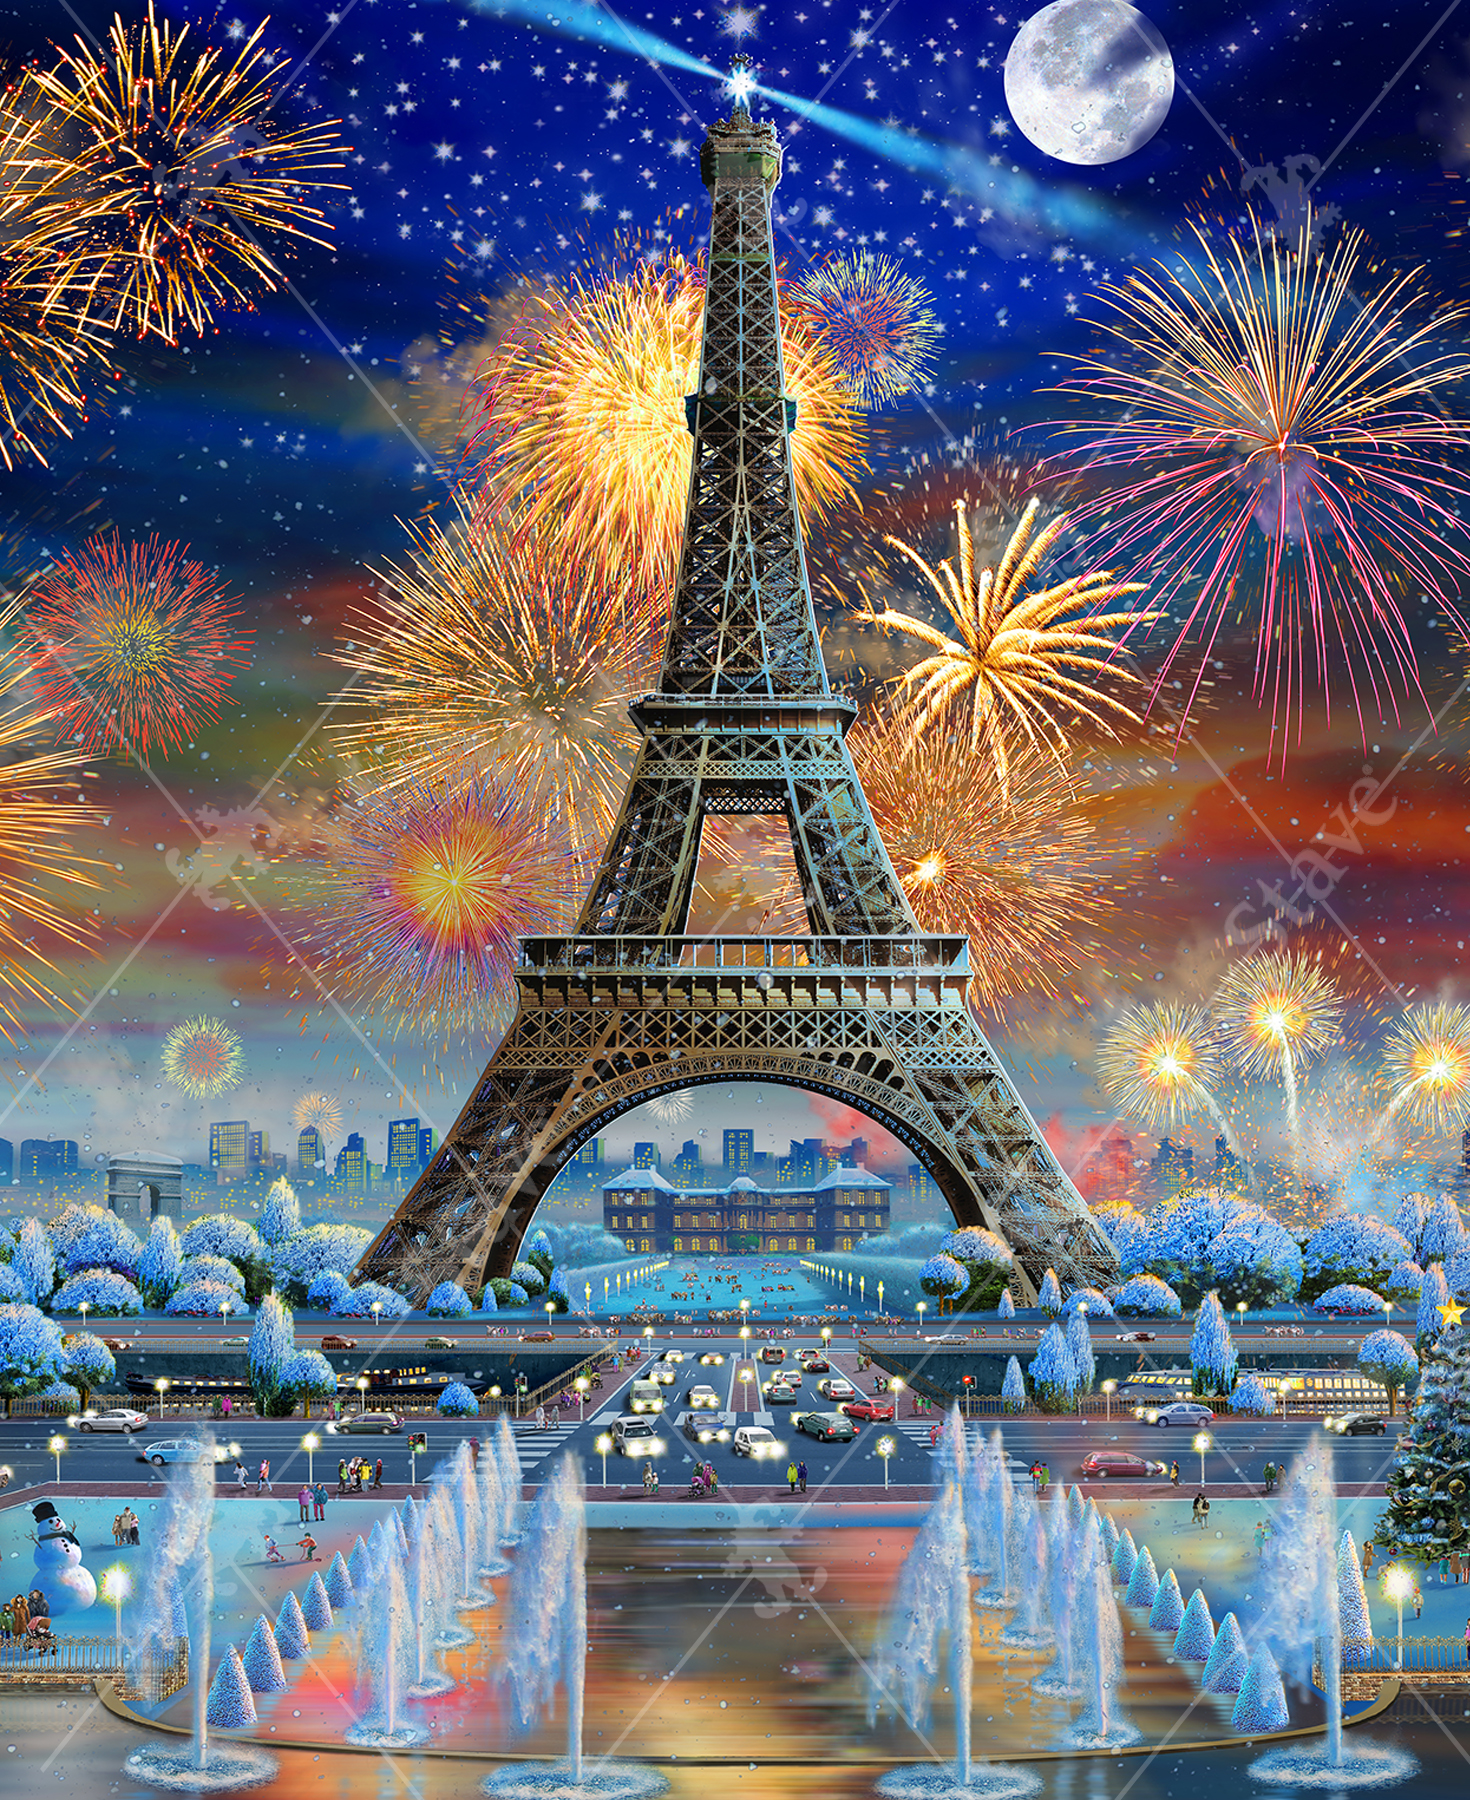 Close-up of Eiffel Tower Celebration wooden jigsaw puzzle displaying a winter scene of the Eiffel Tower surrounded by snow-covered trees and icy water displays. Cars drive by on the busy streets as fireworks light up the night sky to celebrate New Year's Eve.